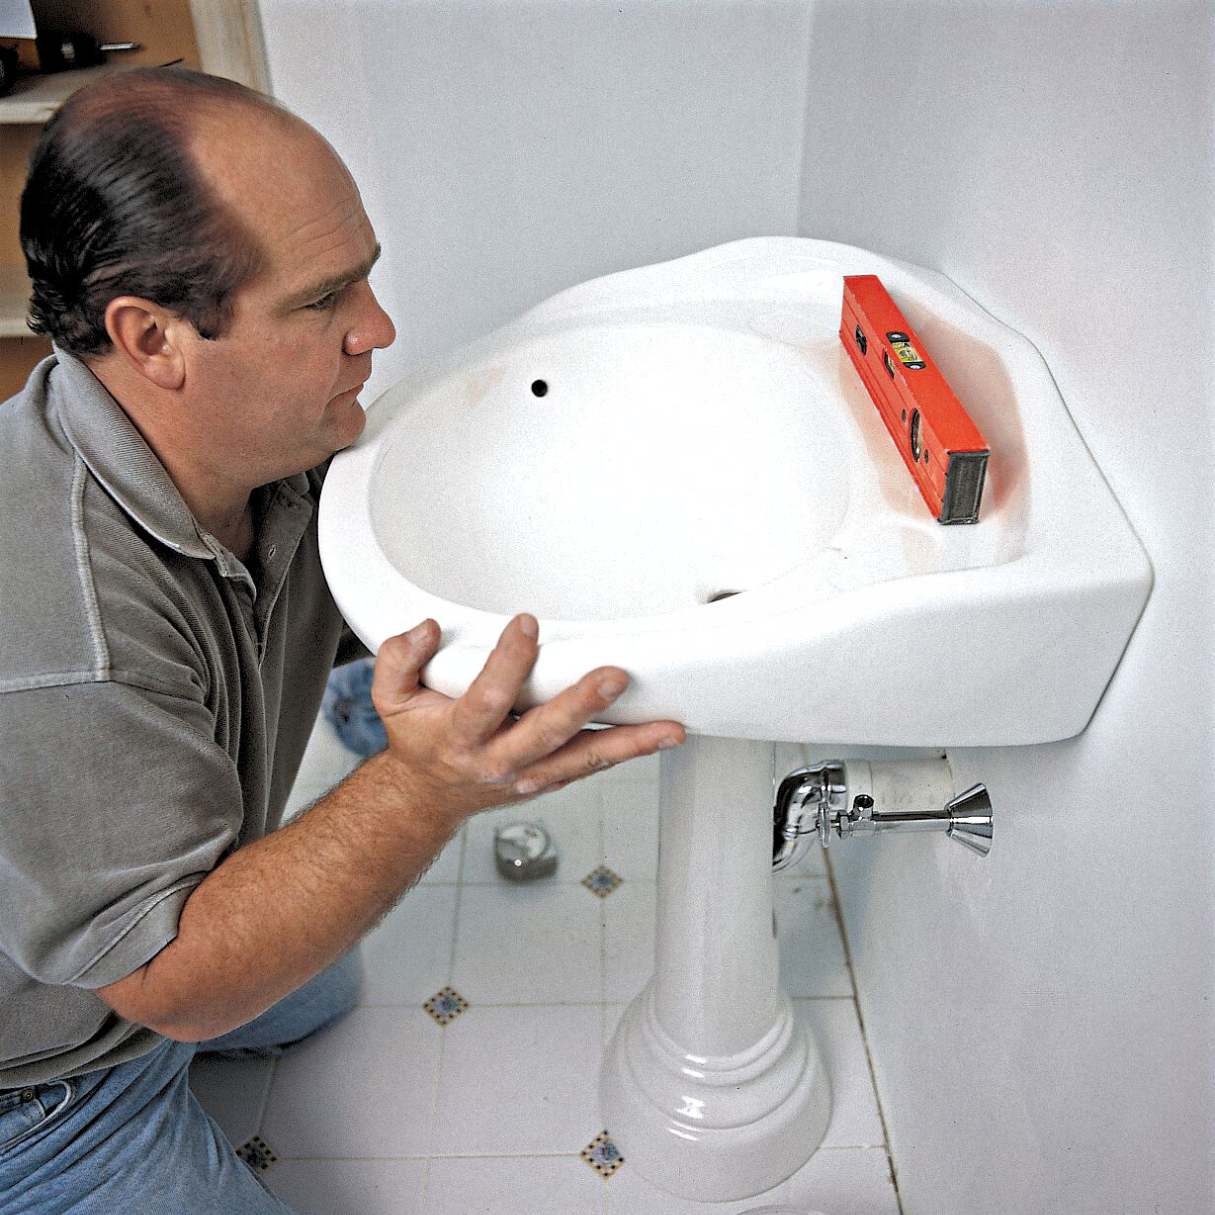 How To Install A Pedestal Sink With Wall Plumbing